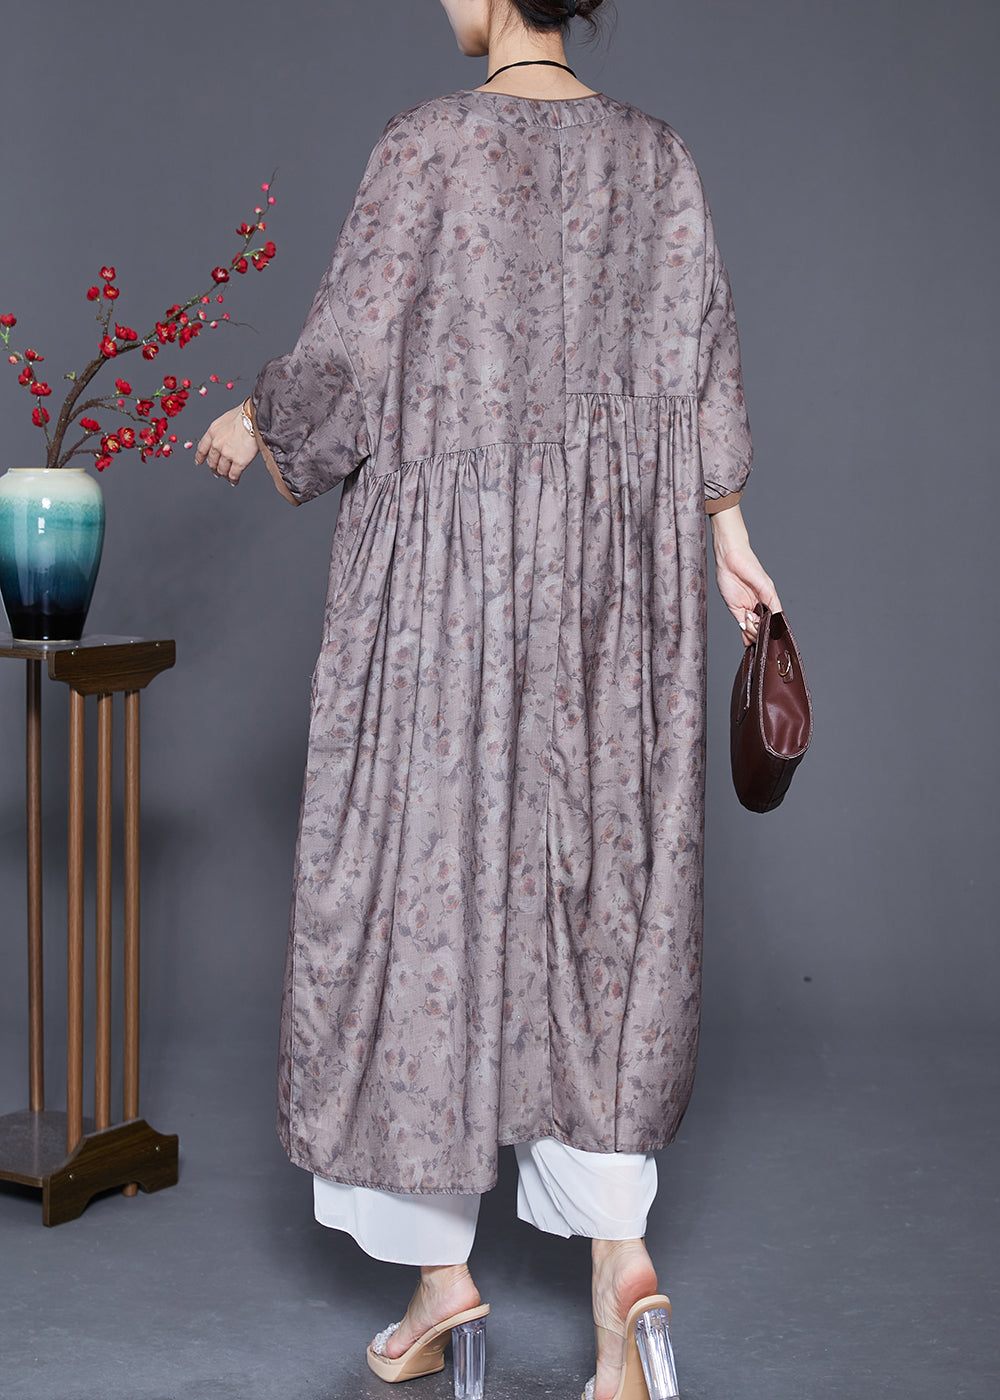 Plus Size Embroideried Print Wrinkled Linen Robe Dresses Summer